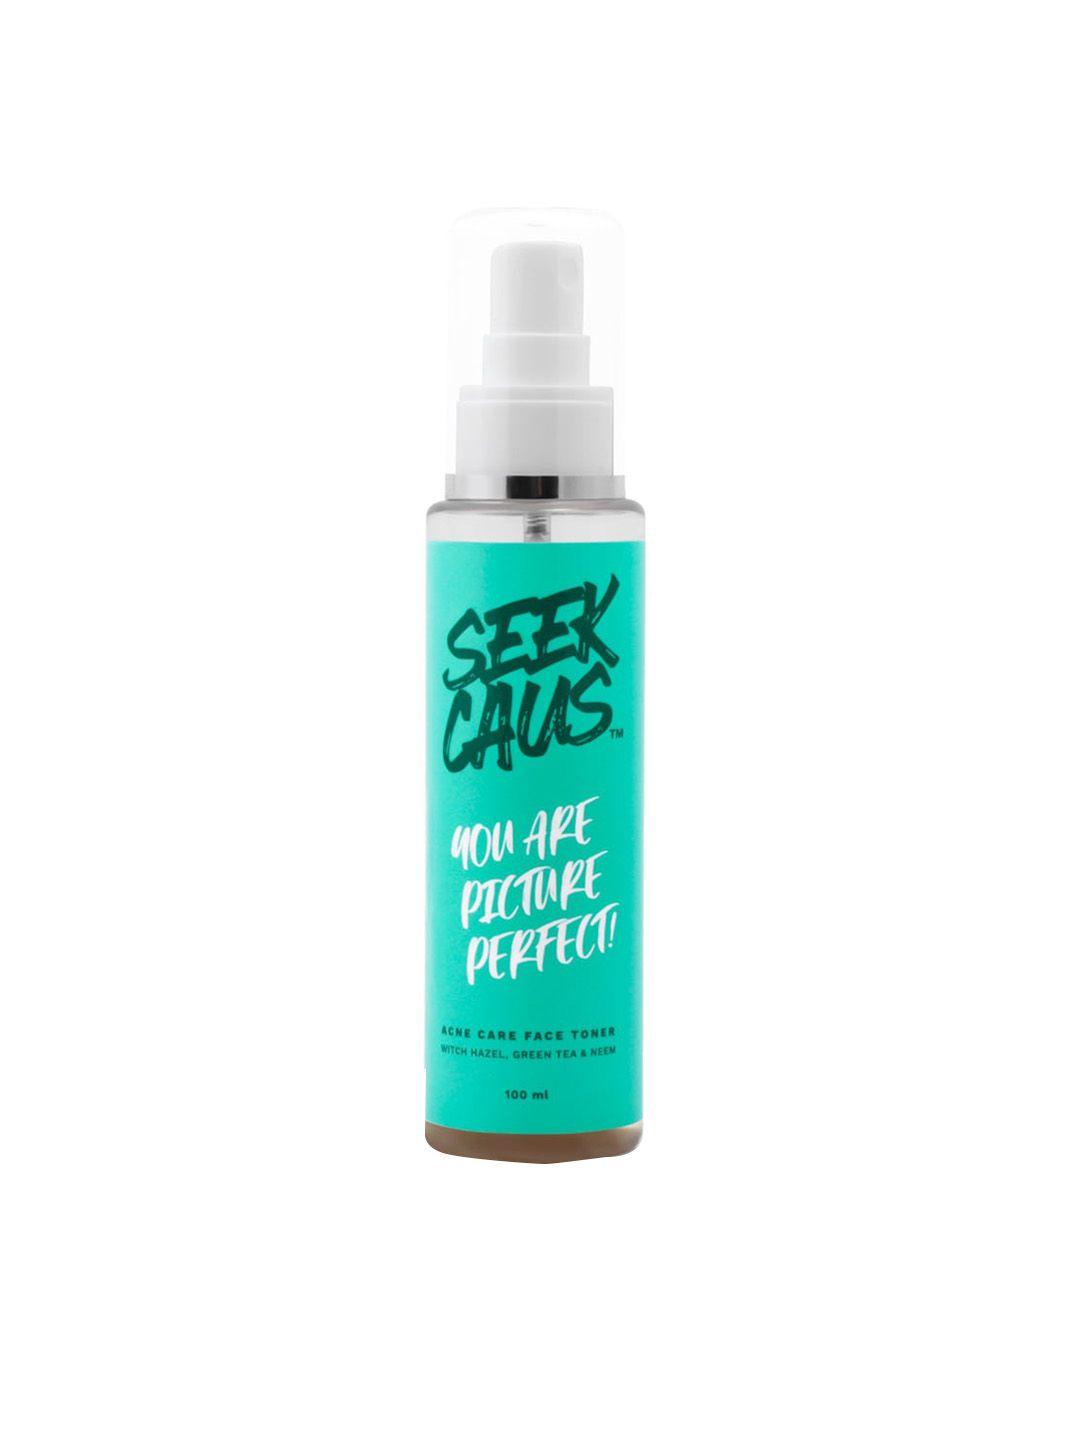 seekcaus you are picture perfect acne care face toner - 100 ml